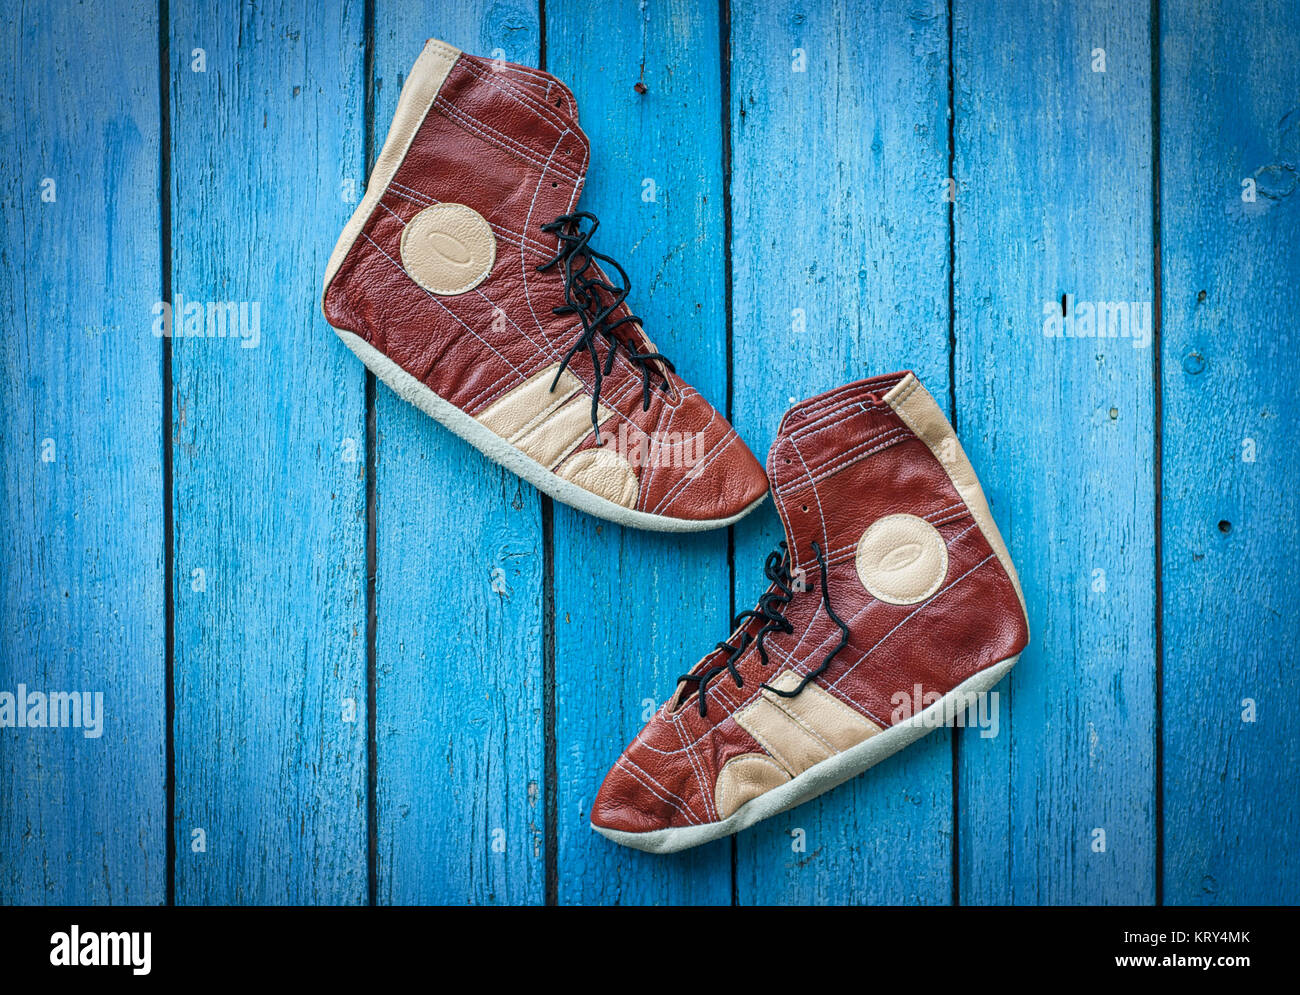 Vintage leather shoes for wrestling Stock Photo